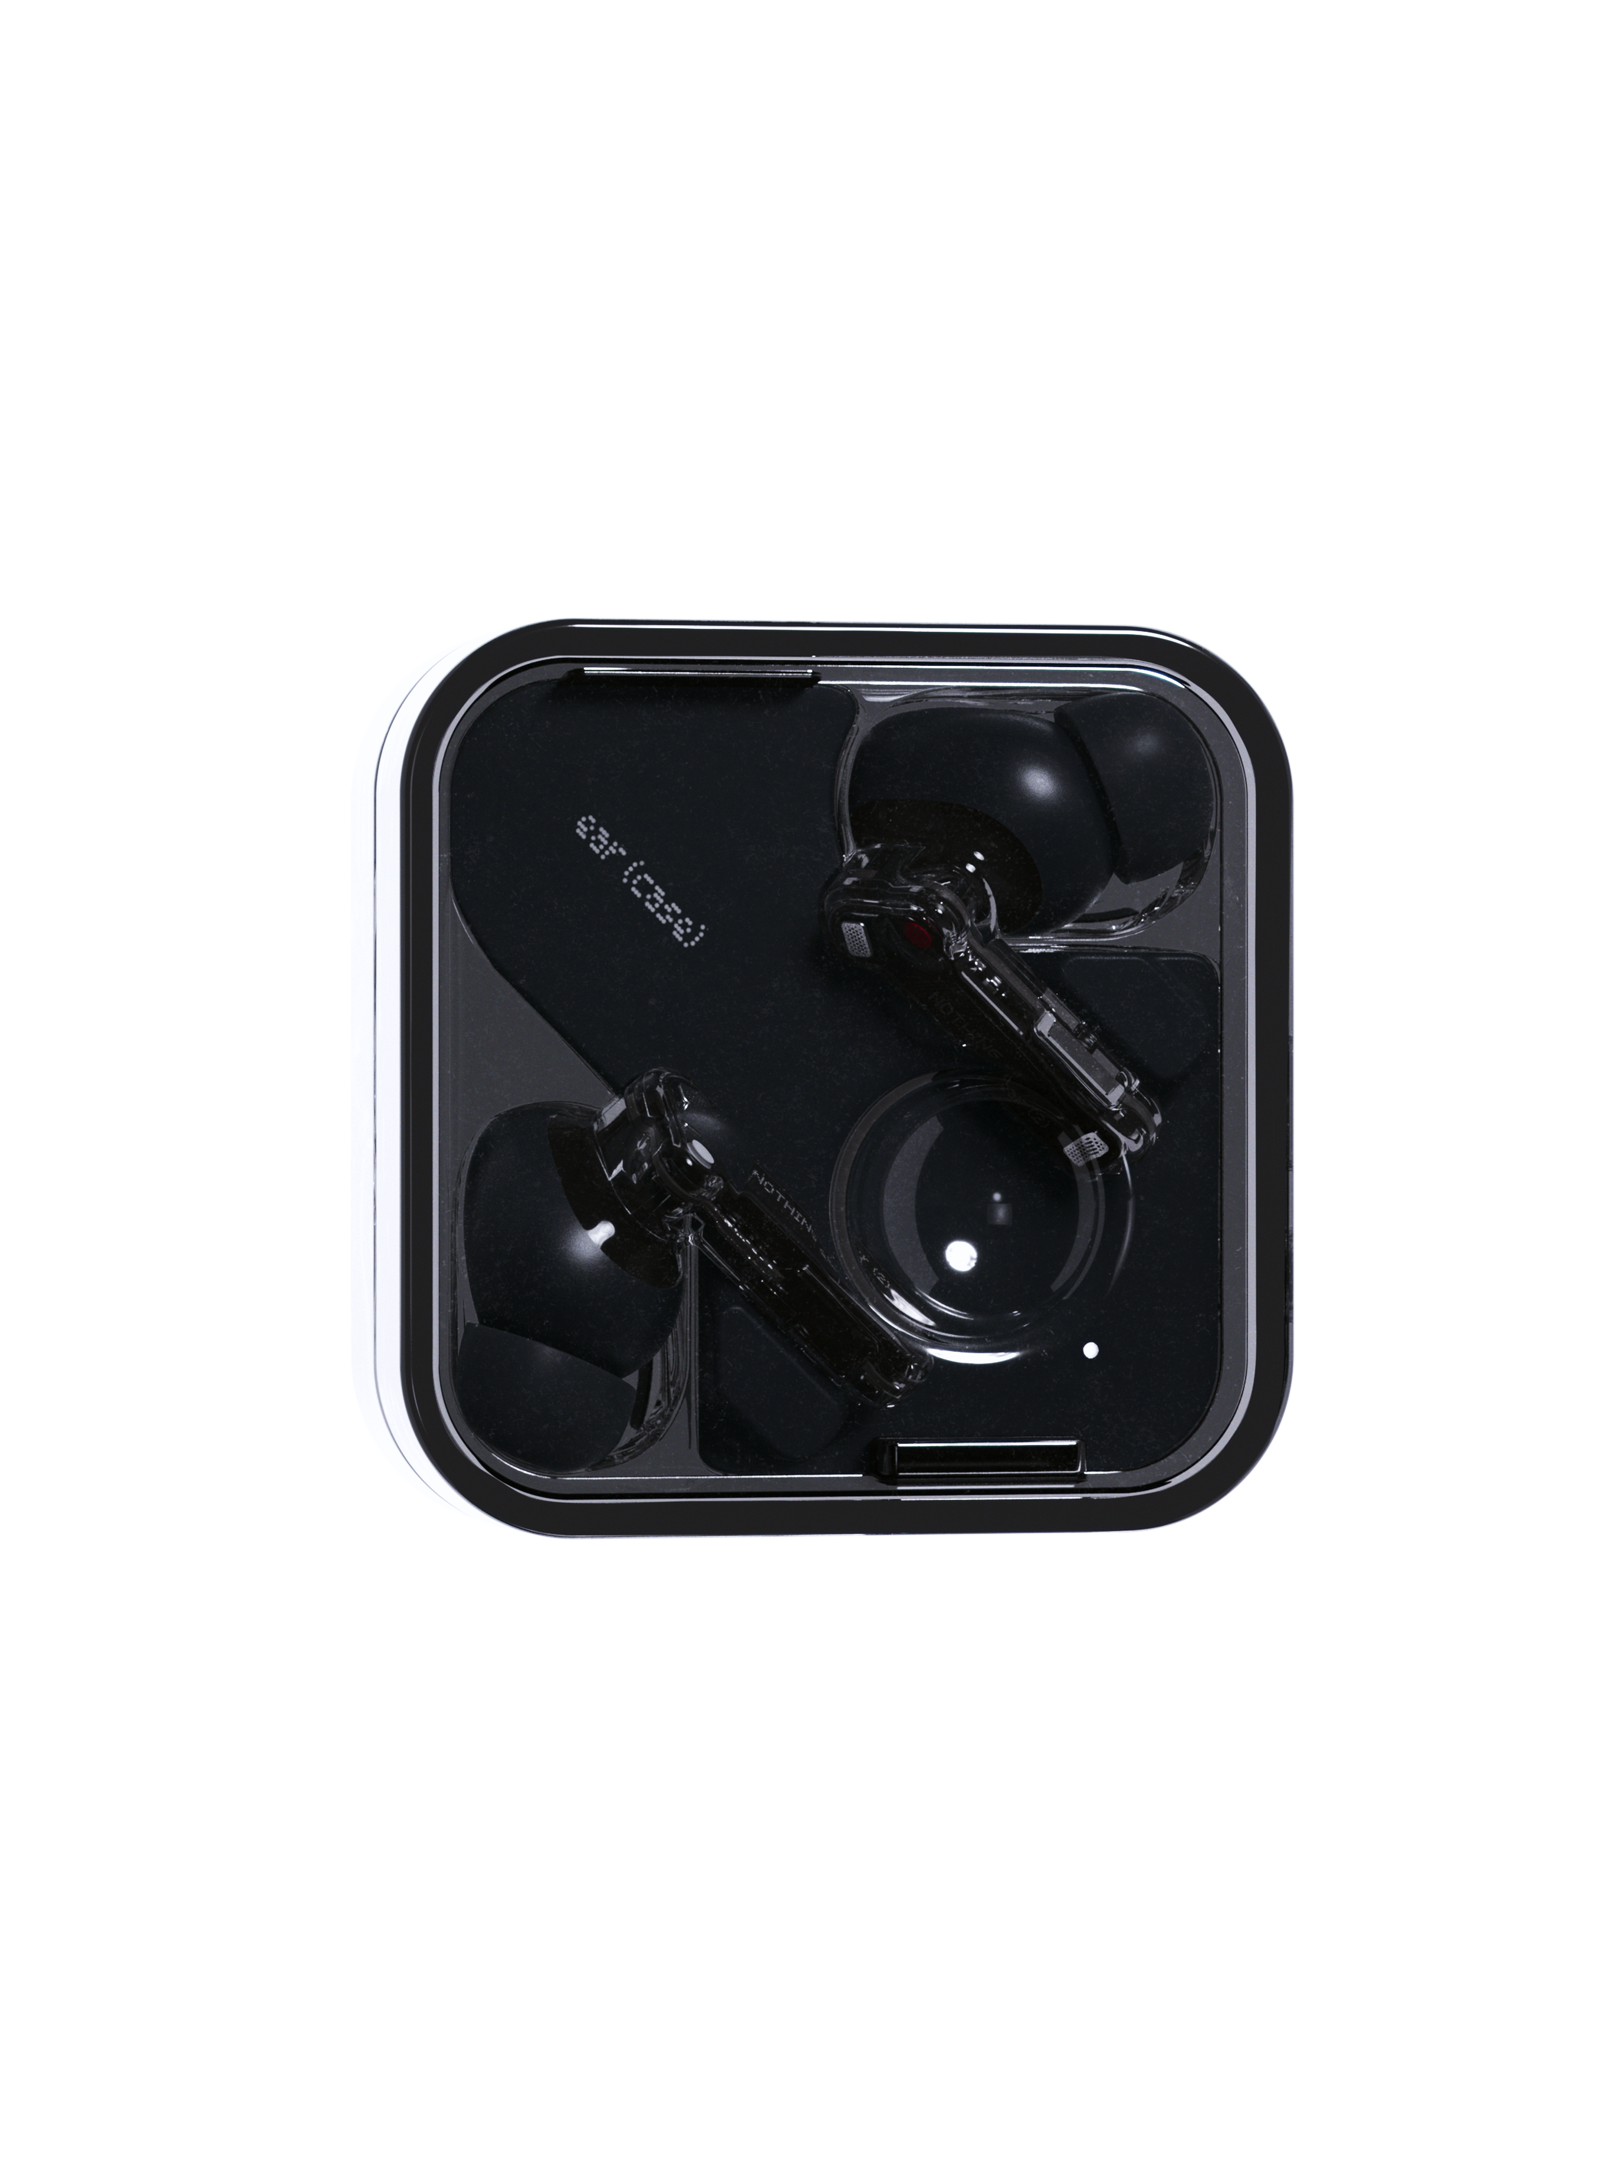 Nothing ear (2) TWS Bluetooth Earbuds Sound by Teenage Engineering ship by  Fedex